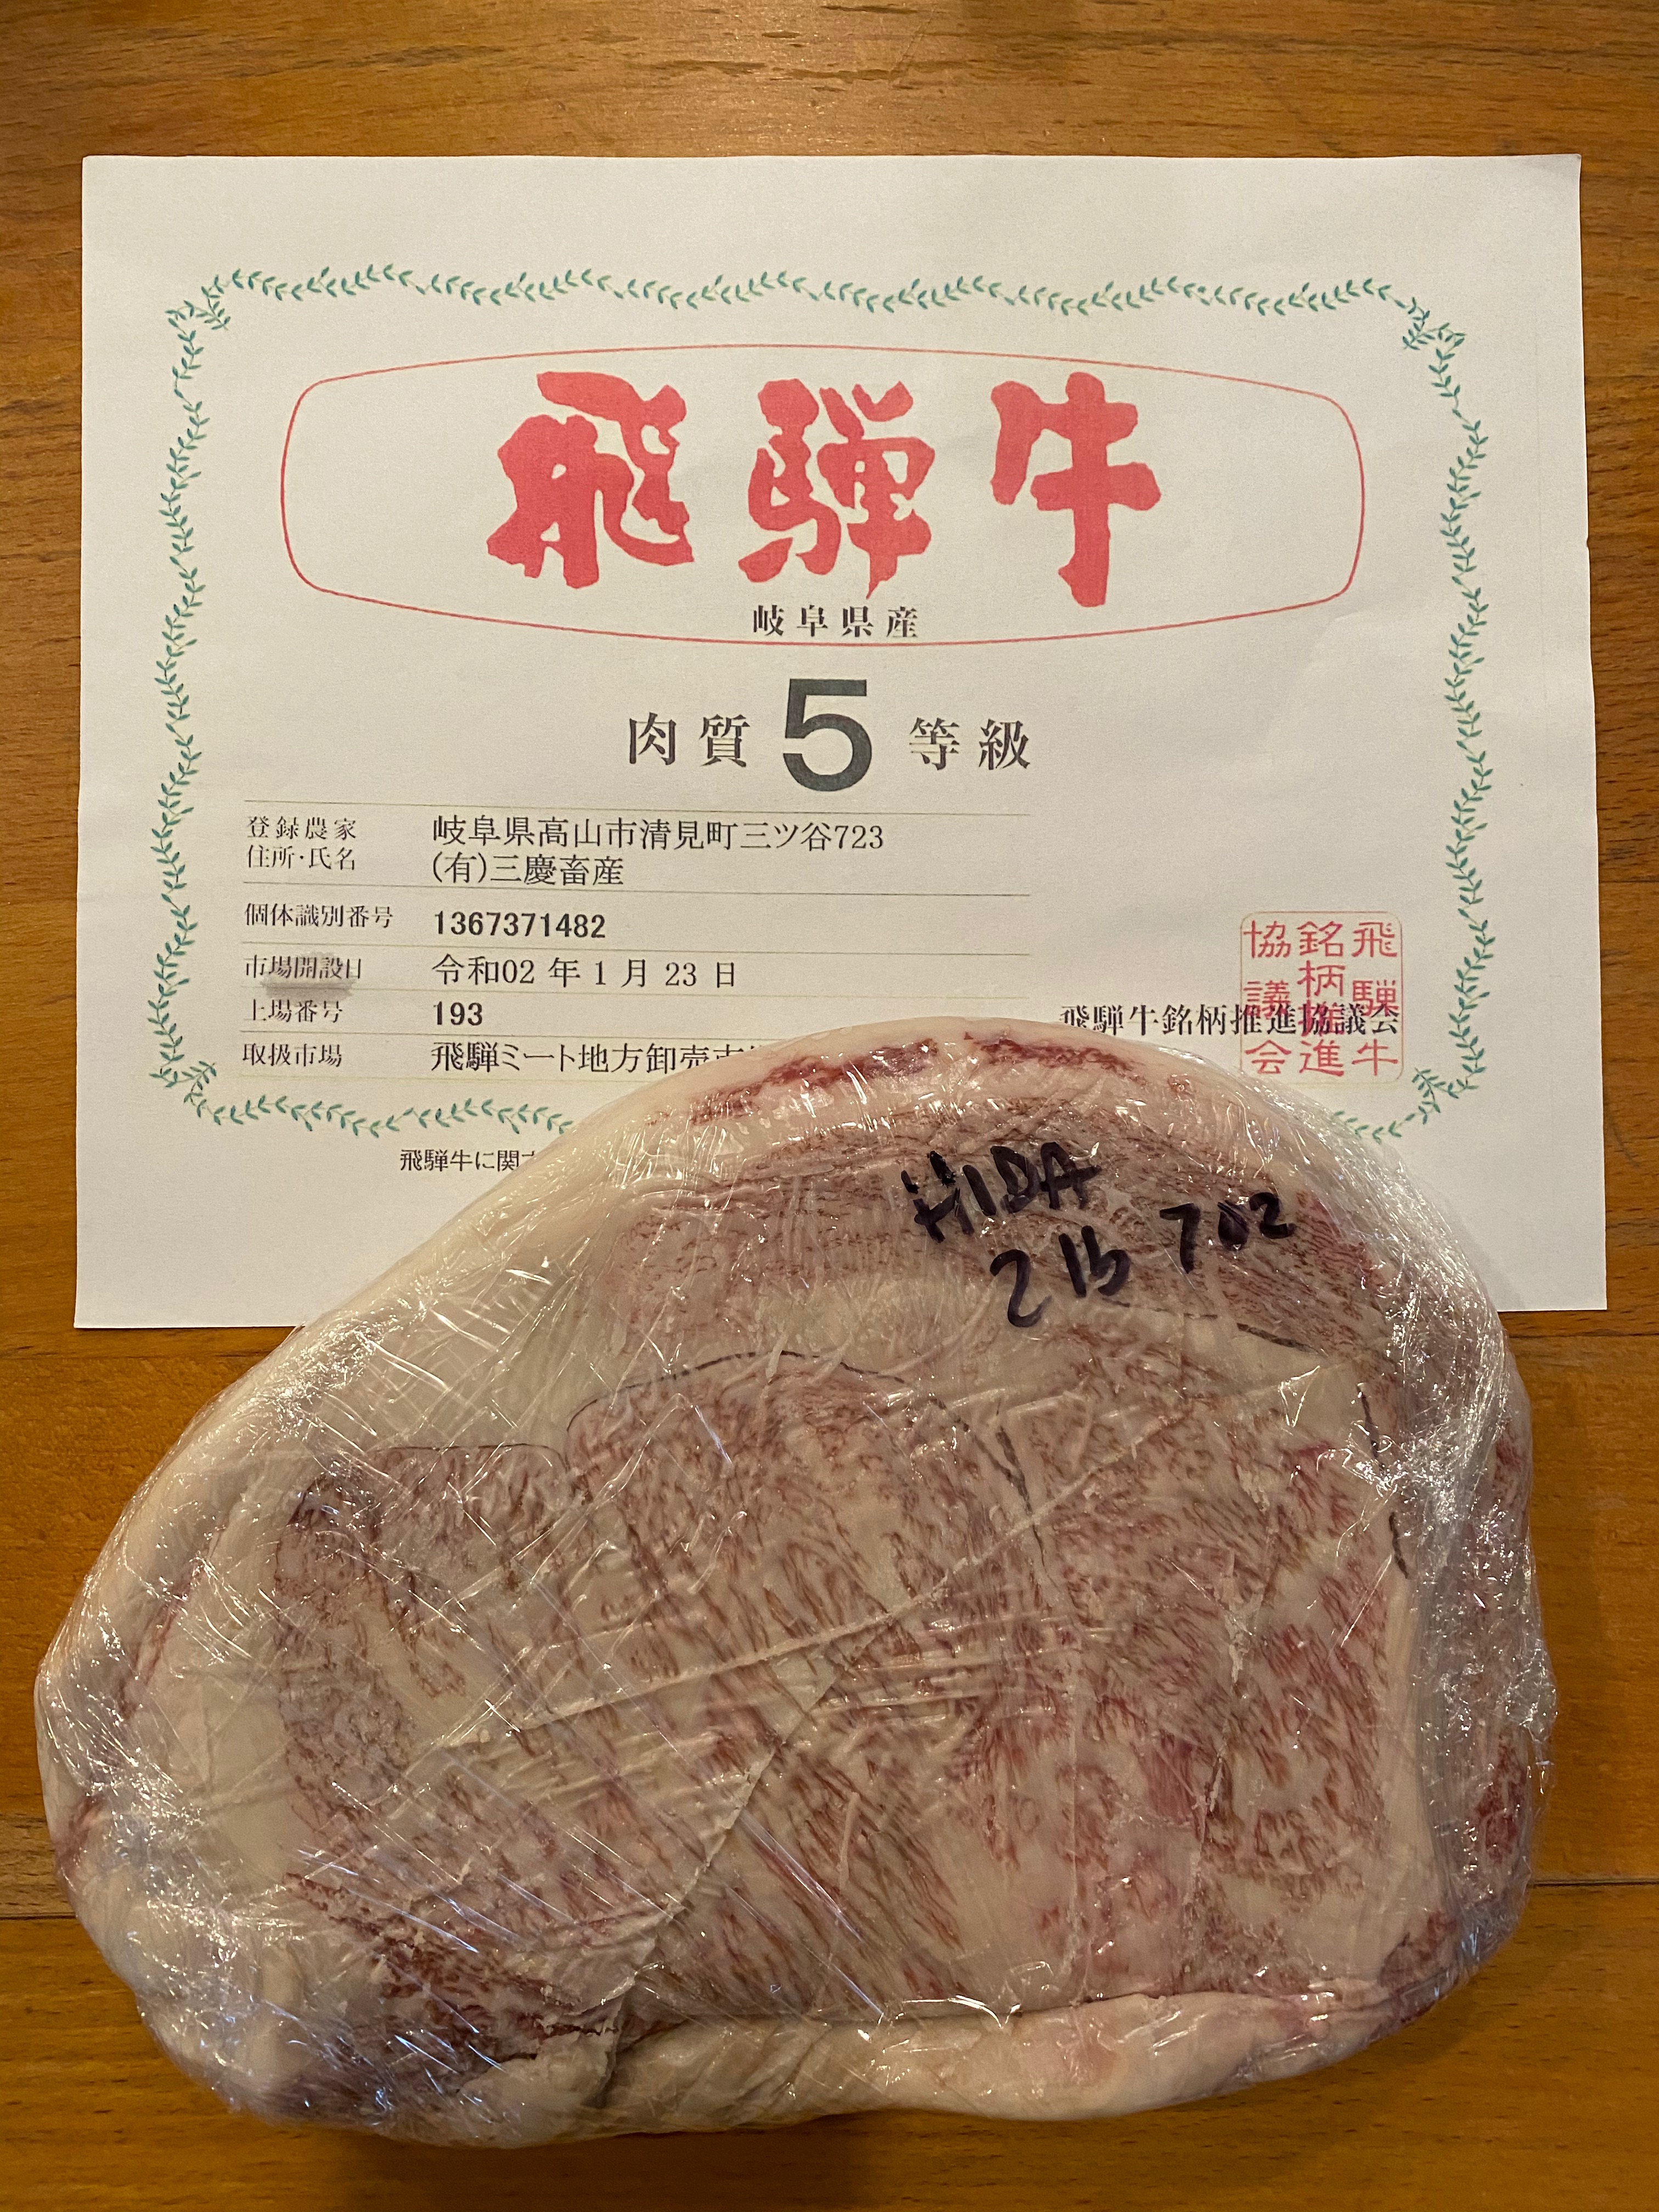 Figure 3: Each wagyu slab comes with a certificate confirming its origin. Lots of kanji (must have been formal).